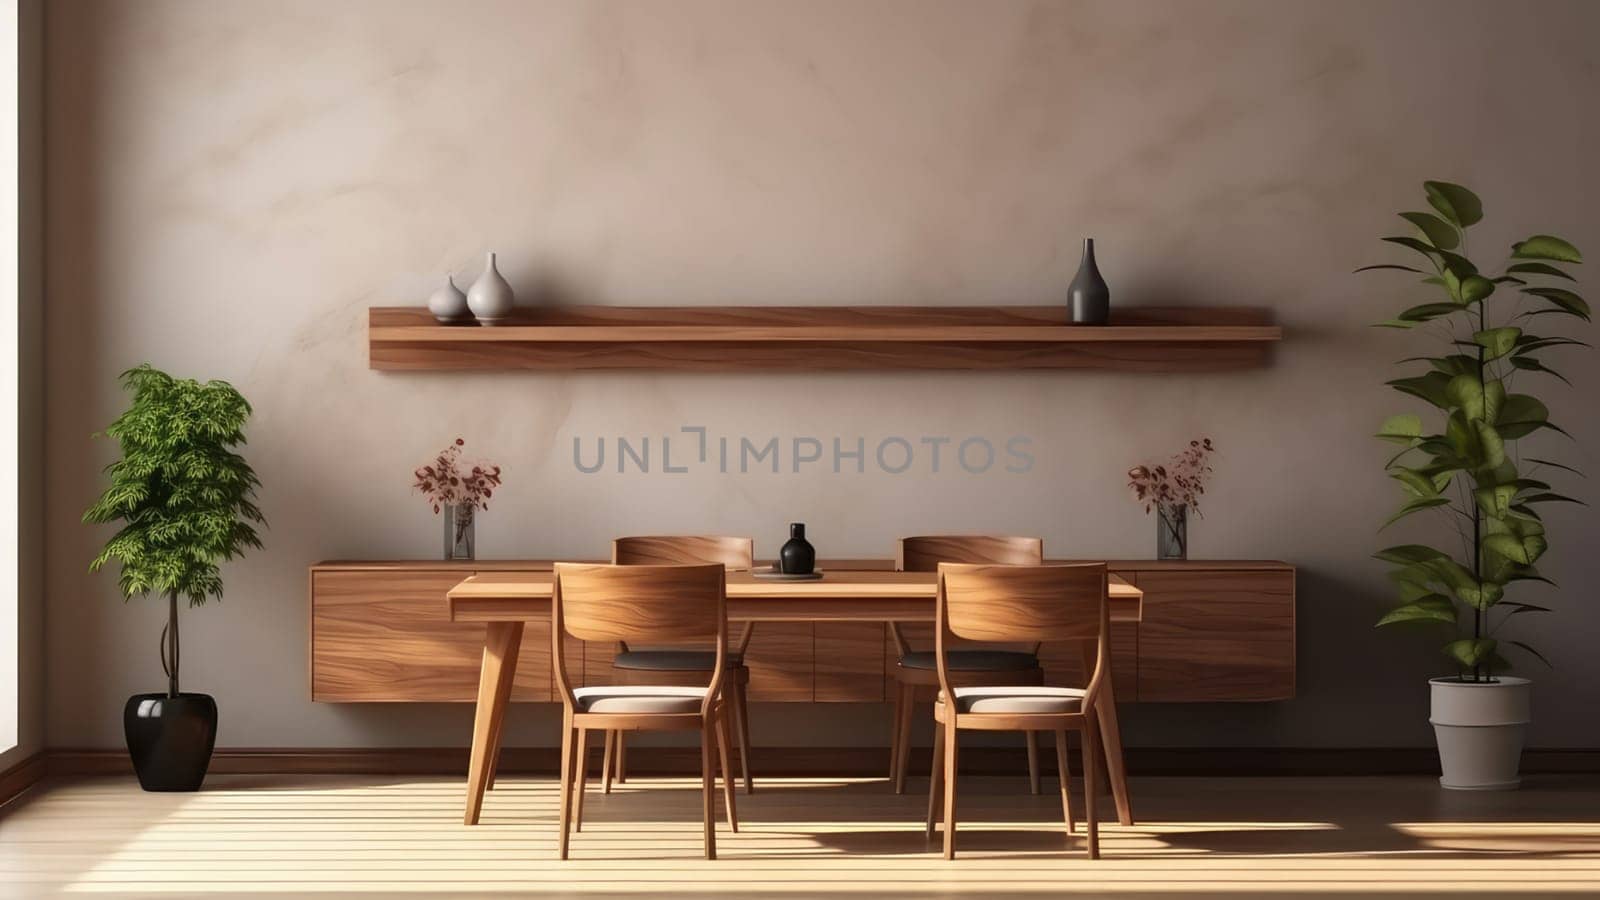 3D rendering of a dining room with a wooden table and upholstery chairs, potted plant and a wooden shelf on wall.